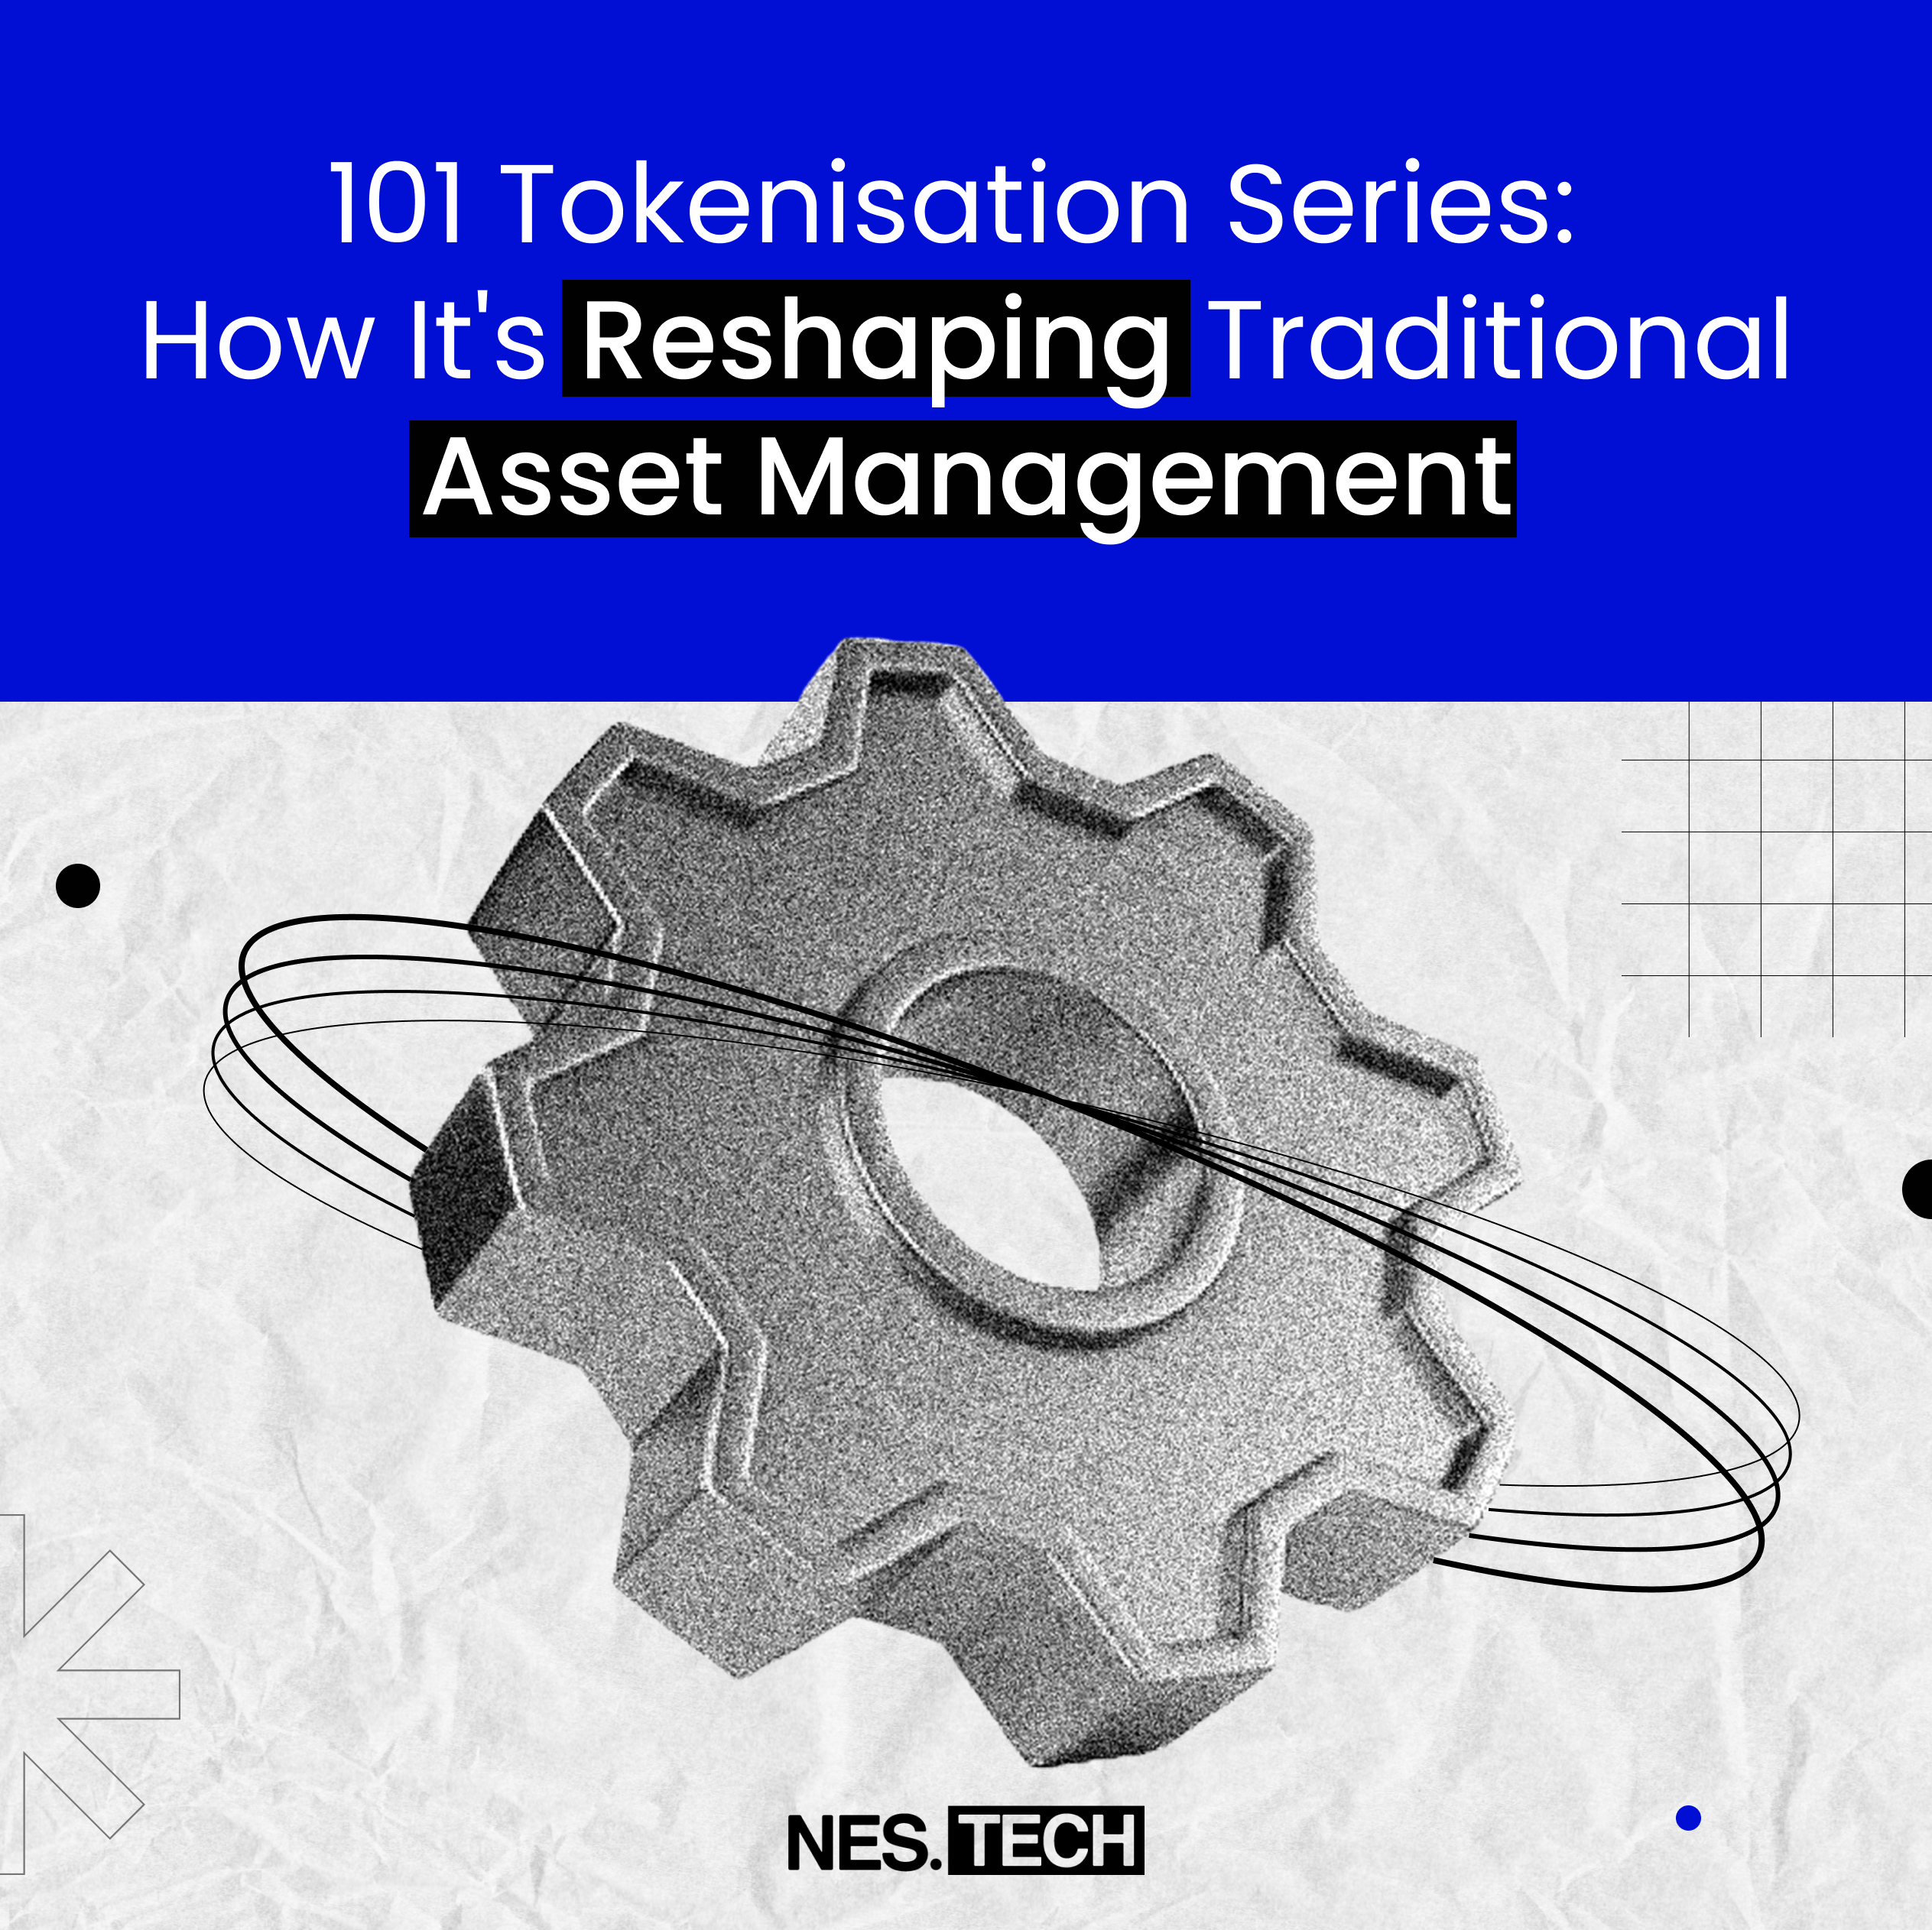 Tokenization: How It’s Reshaping Traditional Asset Management